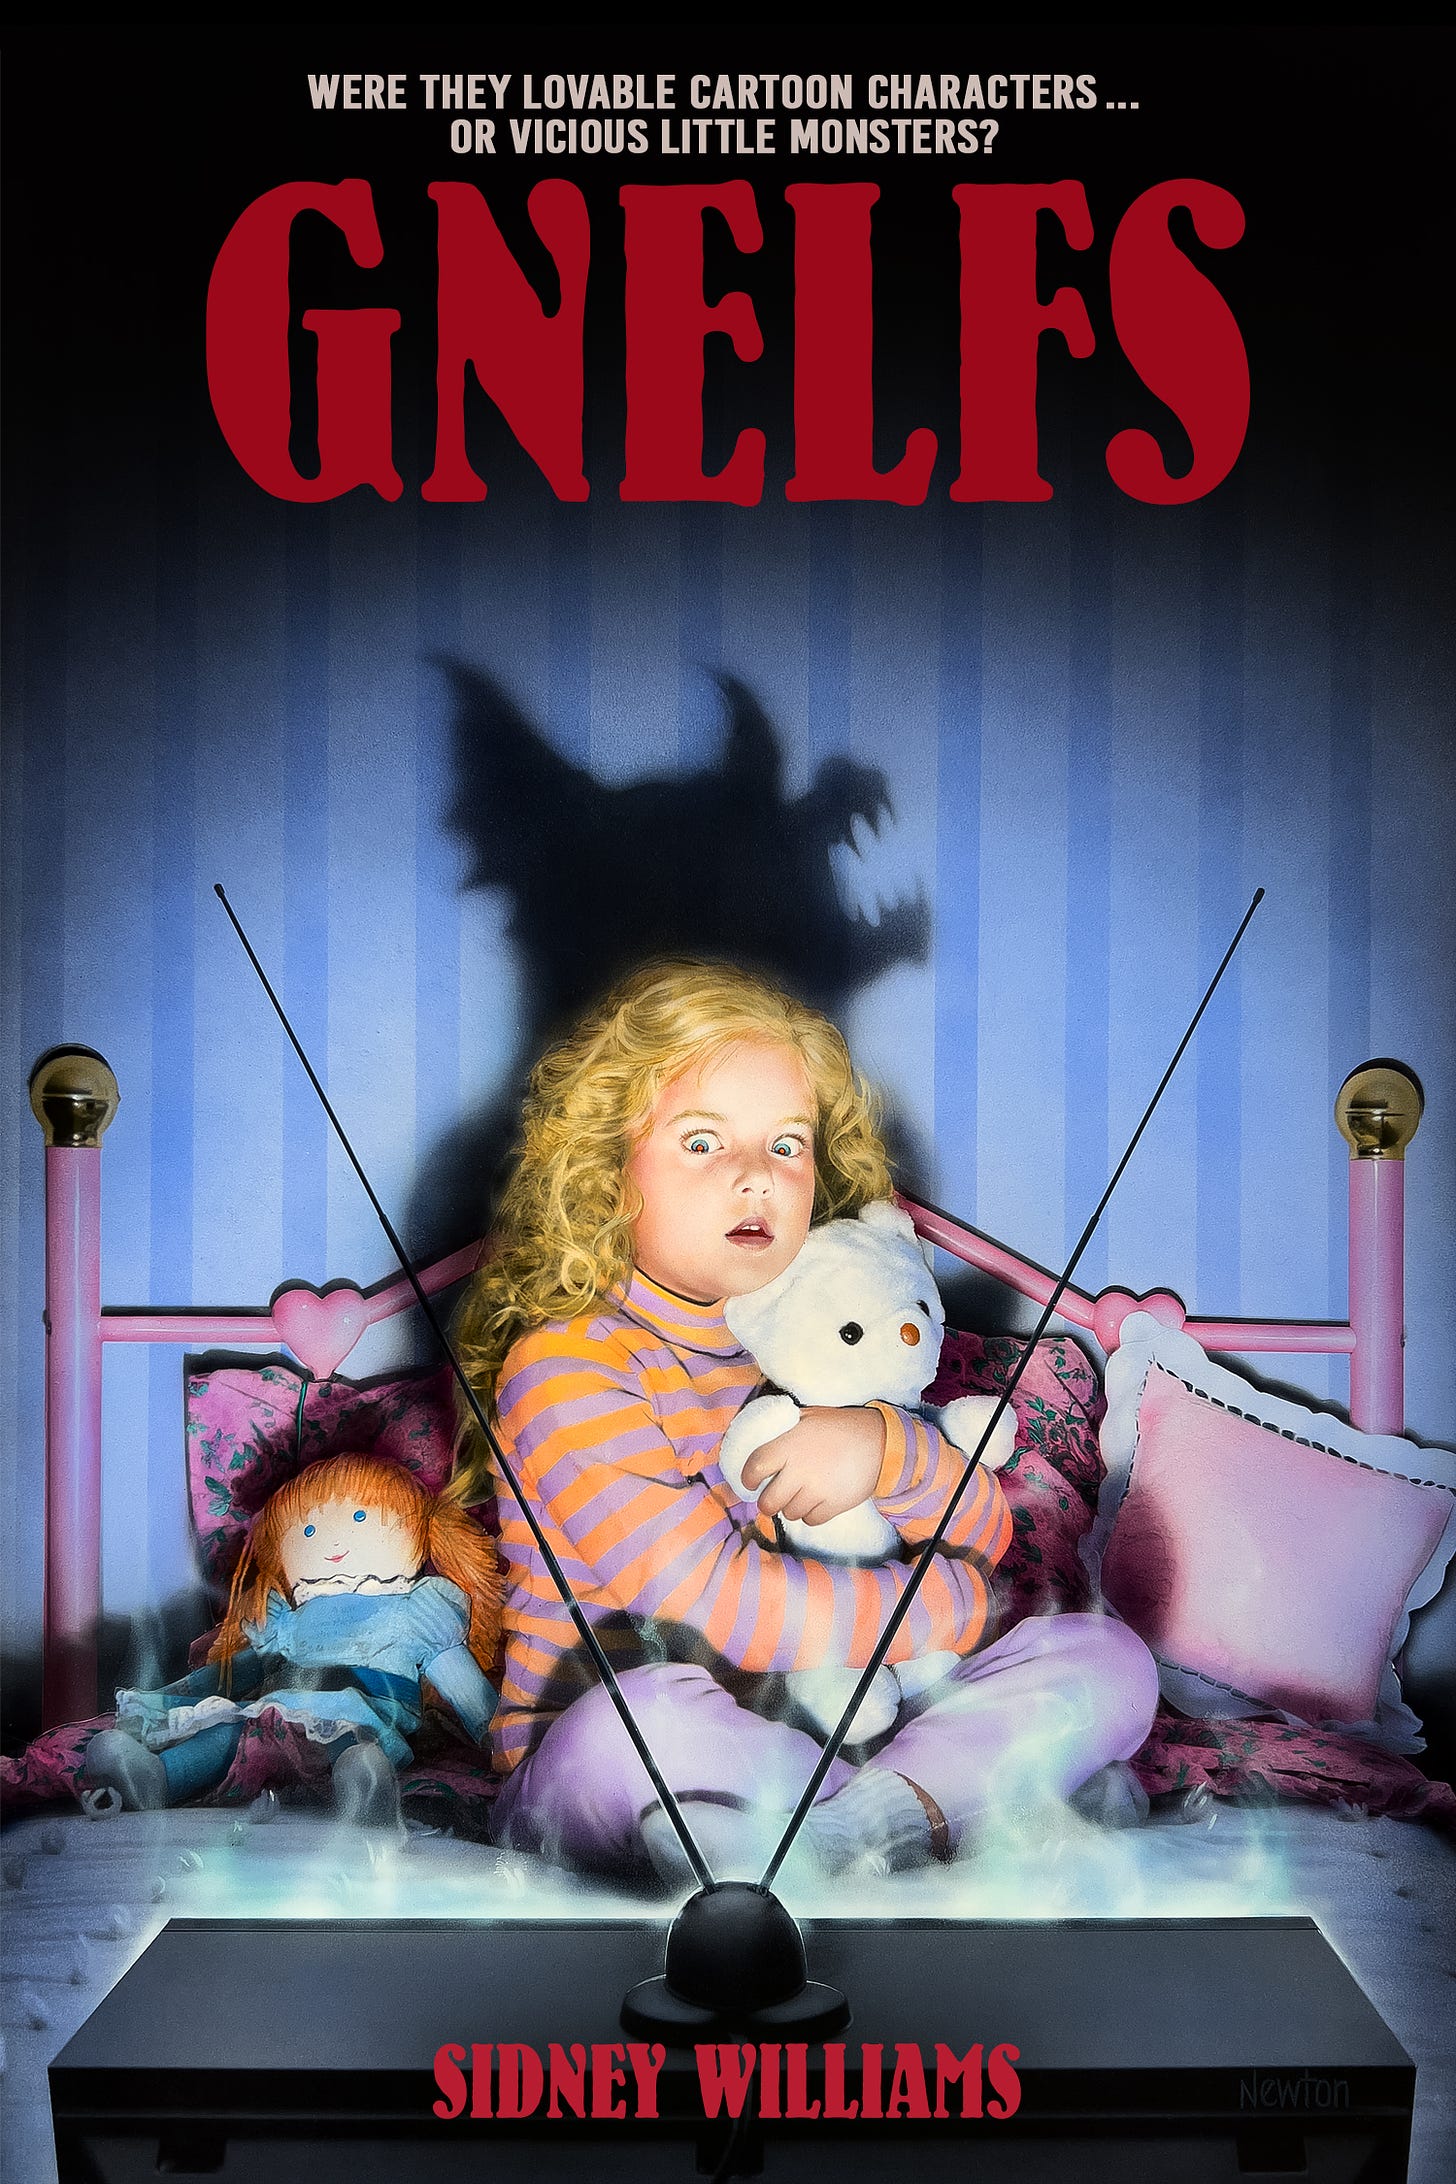 Gnelfs cover - little girl cowers at scary shadow figure